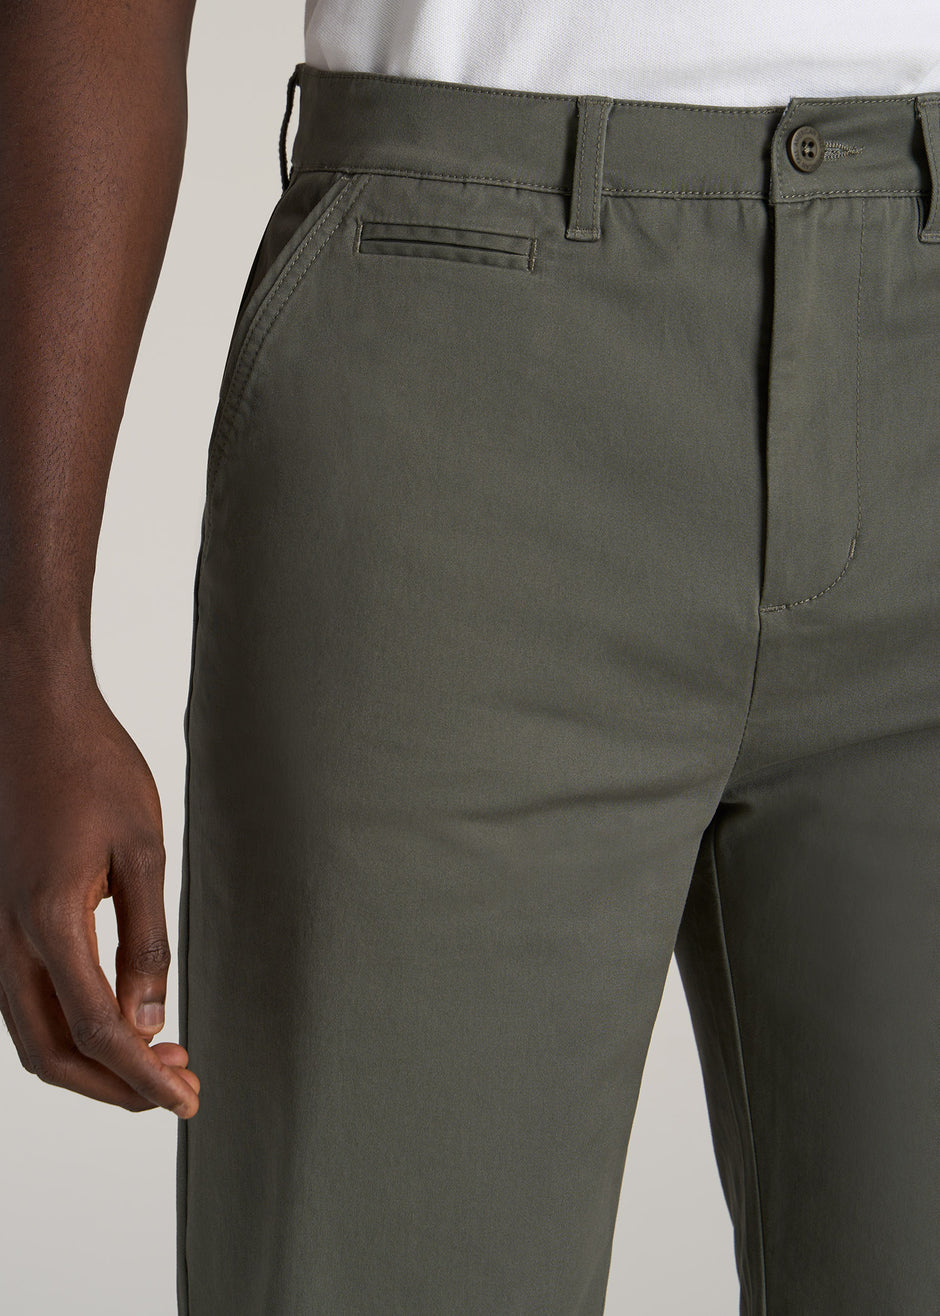 New Arrivals - Clothing for Tall Men | American Tall